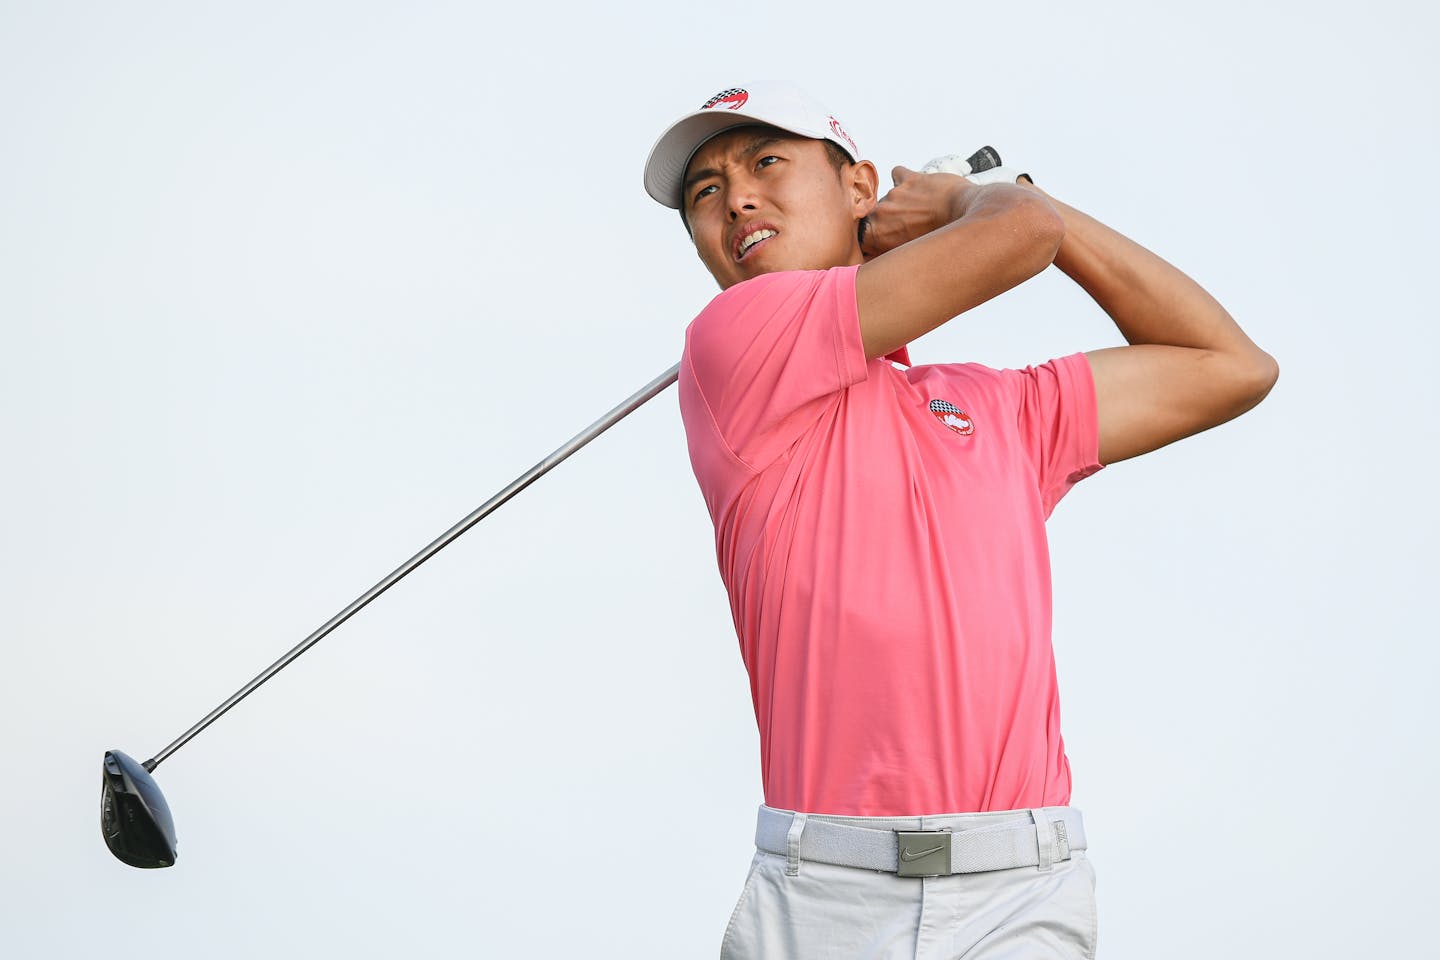 PARIS, FRANCE - SEPTEMBER 03: James Leow of Singapore plays his tee shot on the 3rd hole during Day Four of the 2022 World Amateur Team Golf Championships - Eisenhower Trophy competition at Le Golf National on September 3, 2022 in Paris, France. (Photo by Octavio Passos/Getty Images)